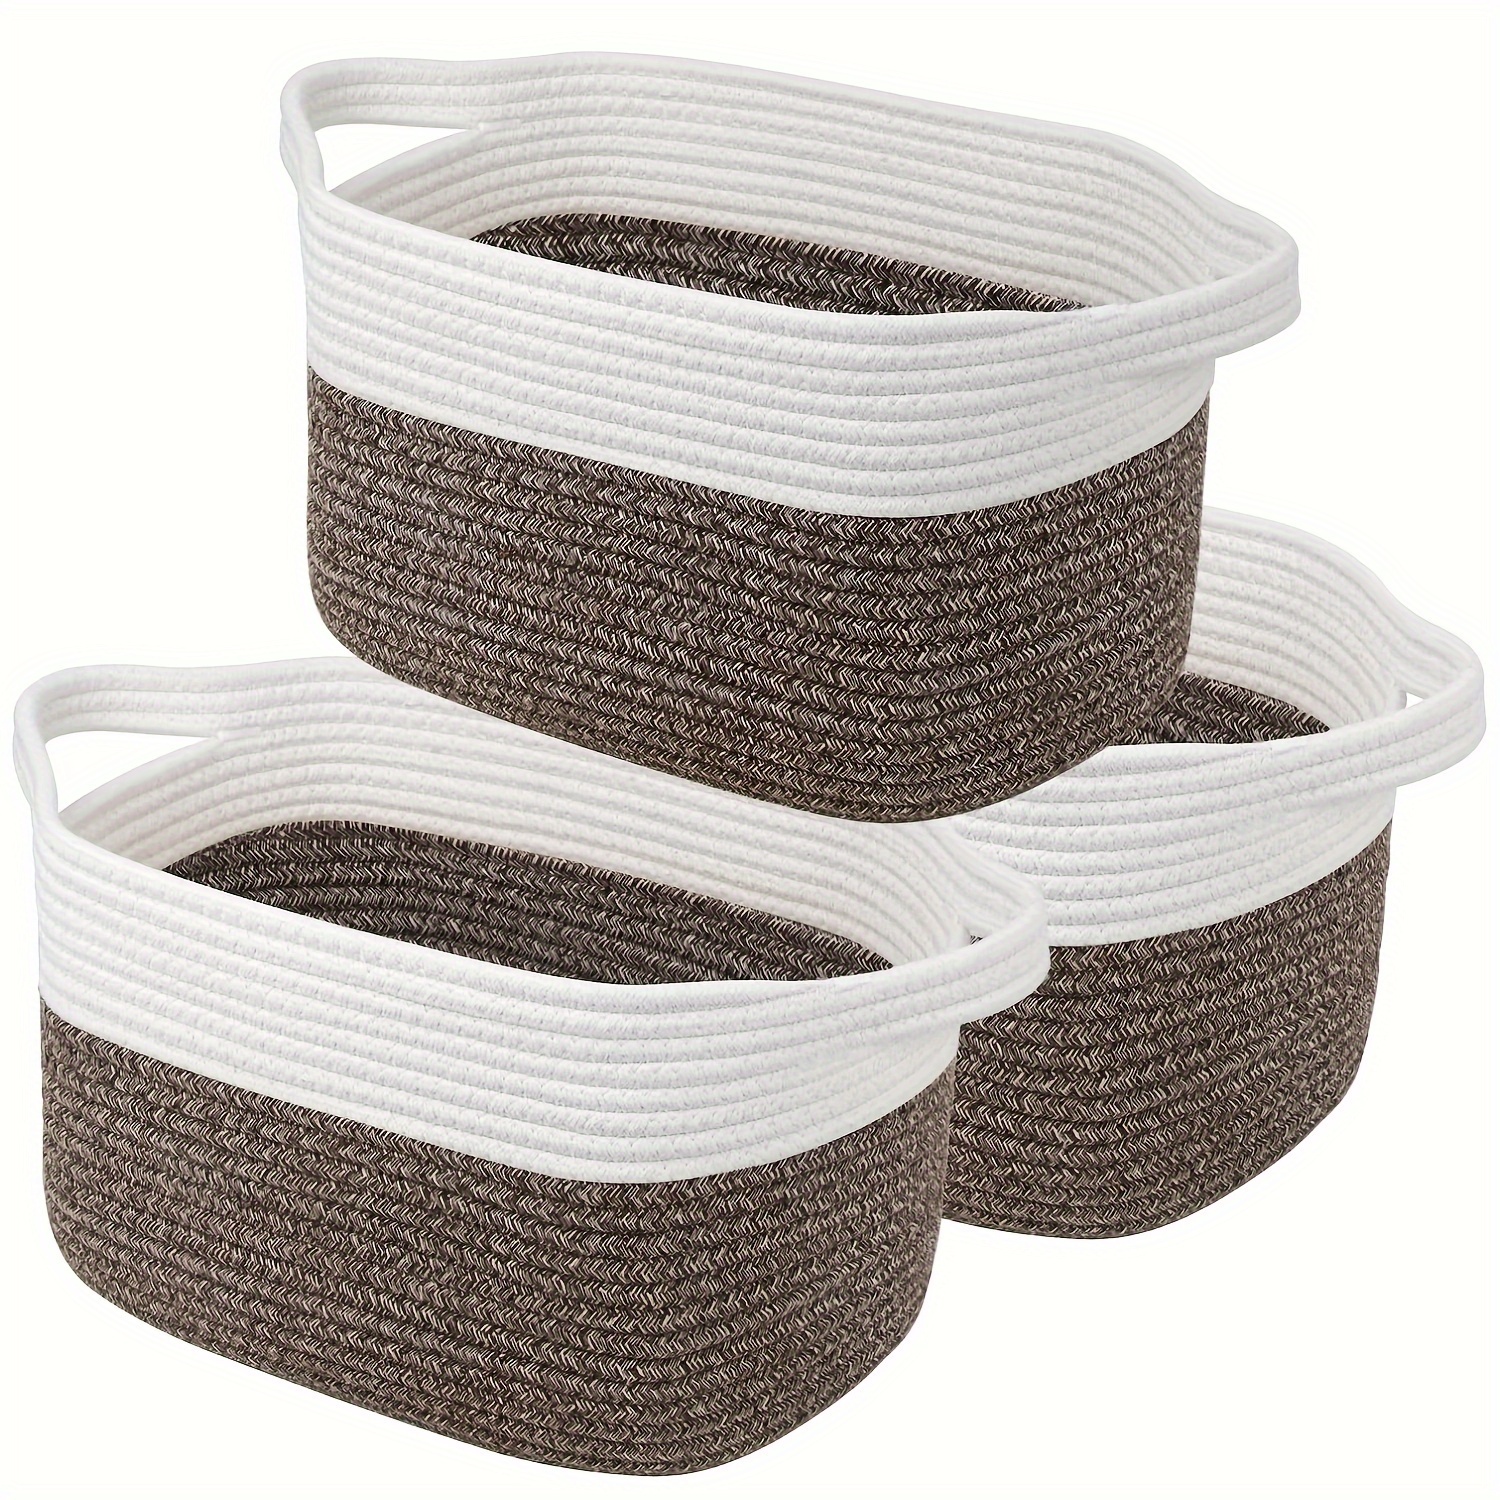 

Aivatoba 1/3 Pcs Rope Basket, Storage Baskets For Organizing - Woven Basket For , Clothes, Towels, Books And Toys (13.4" X 8" X 9" )